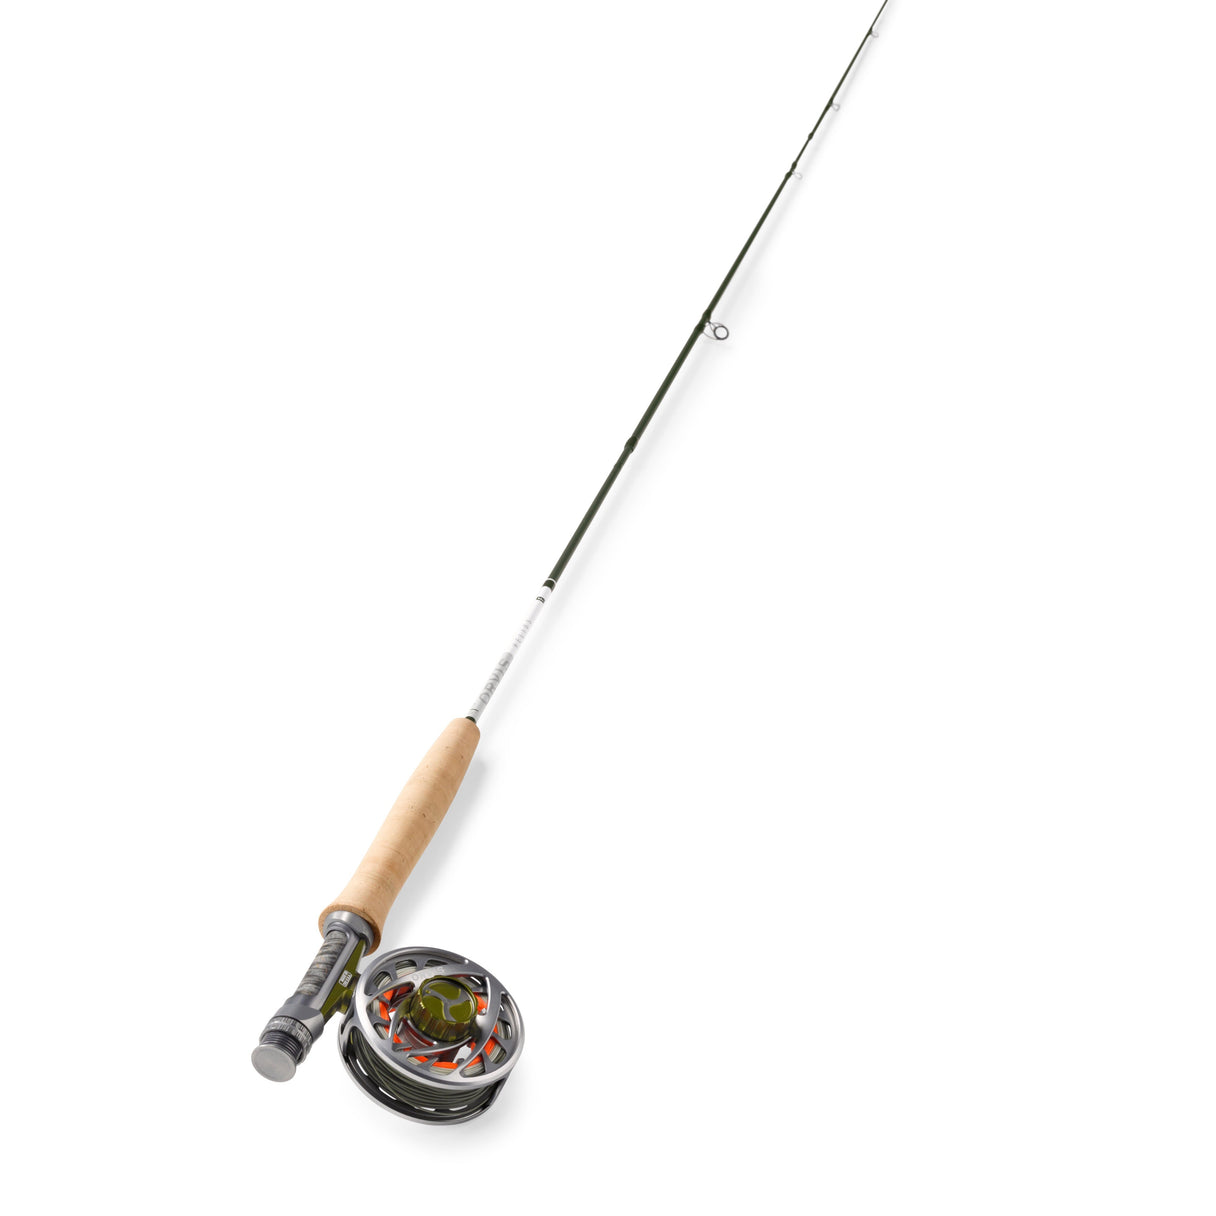 Orvis Helios Big Game Fly Rod Series Product Overview 